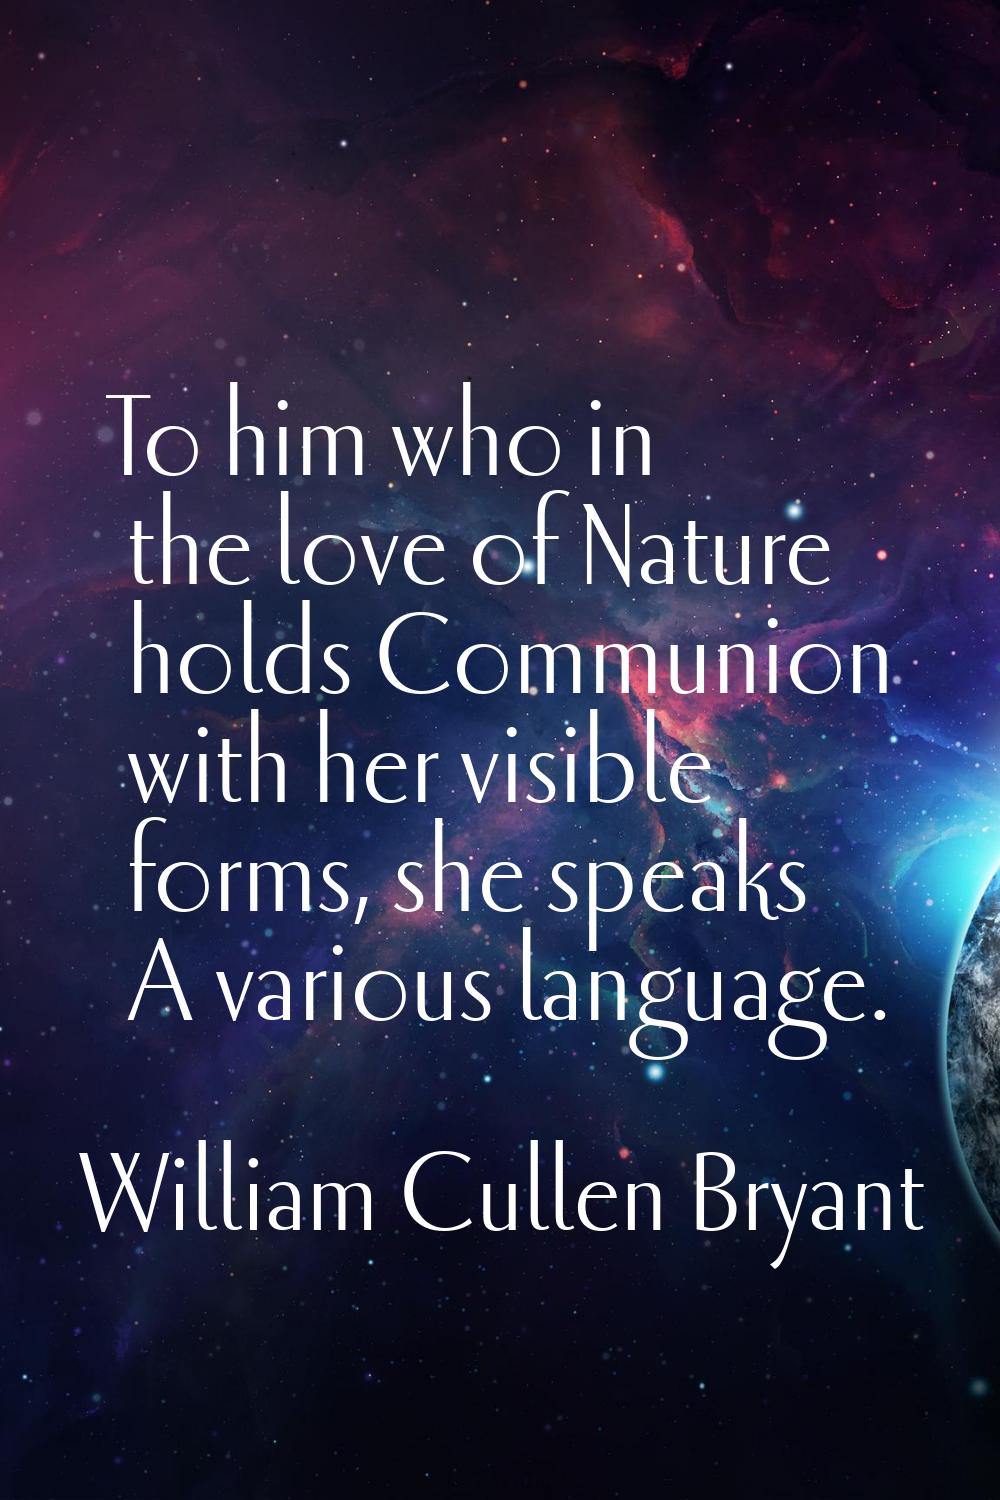 To him who in the love of Nature holds Communion with her visible forms, she speaks A various langu